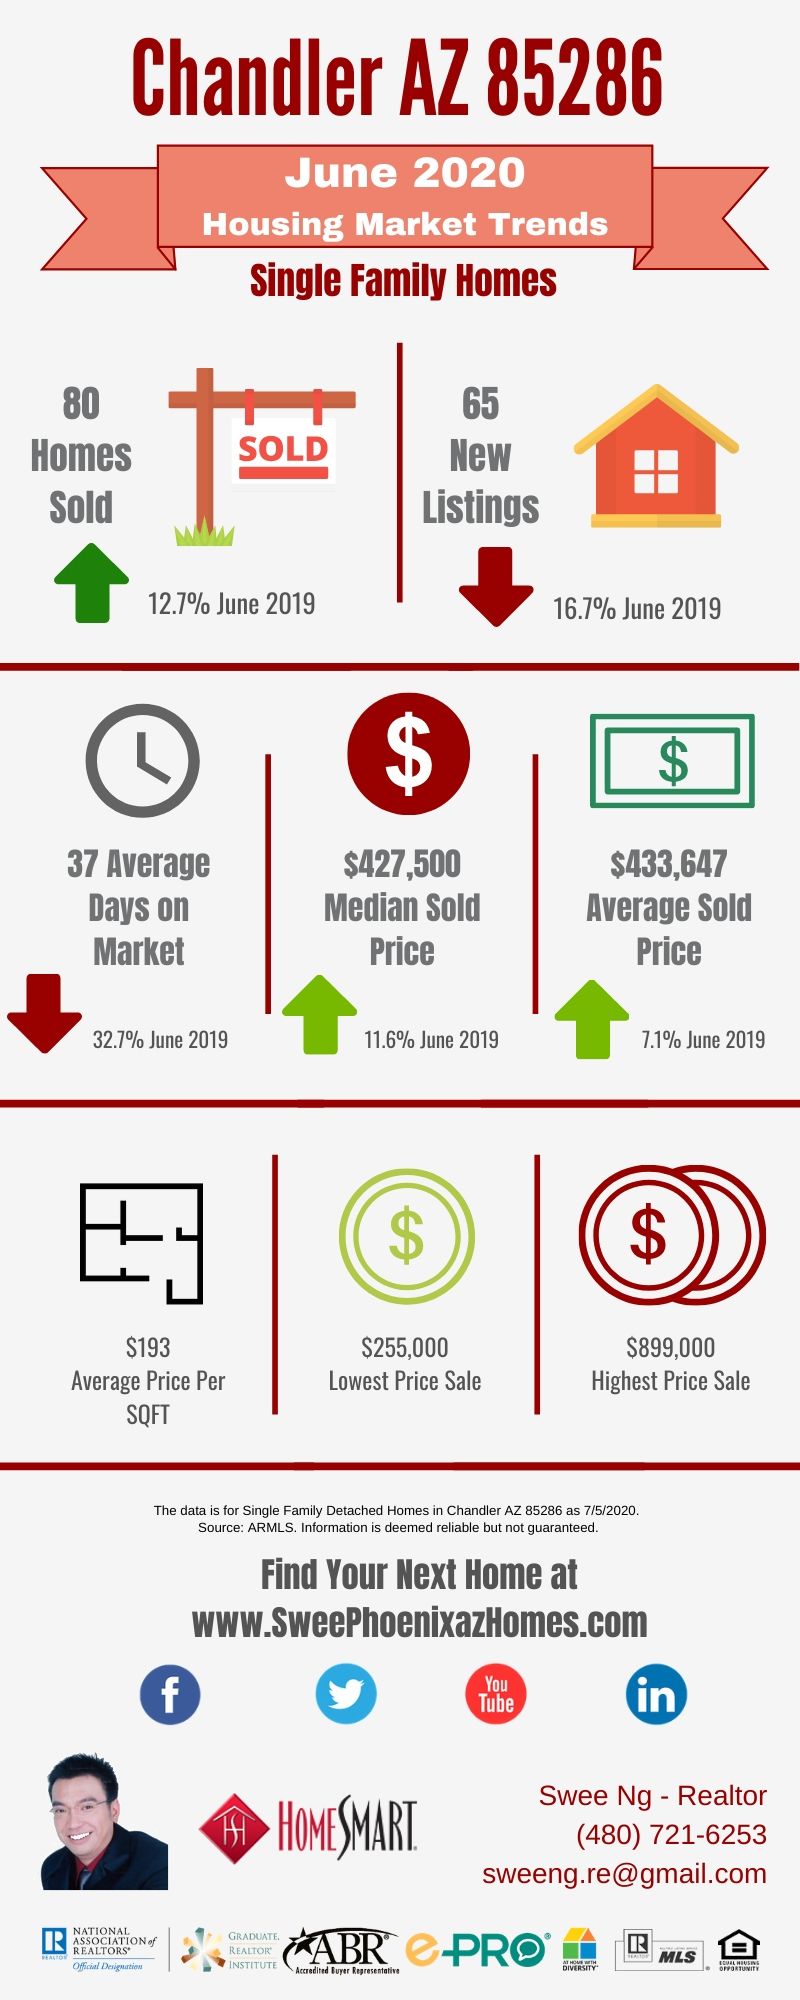 Chandler AZ 85286 Housing Market Trends Report June 2020, House Value, Real Estate and Statistic by Swee Ng